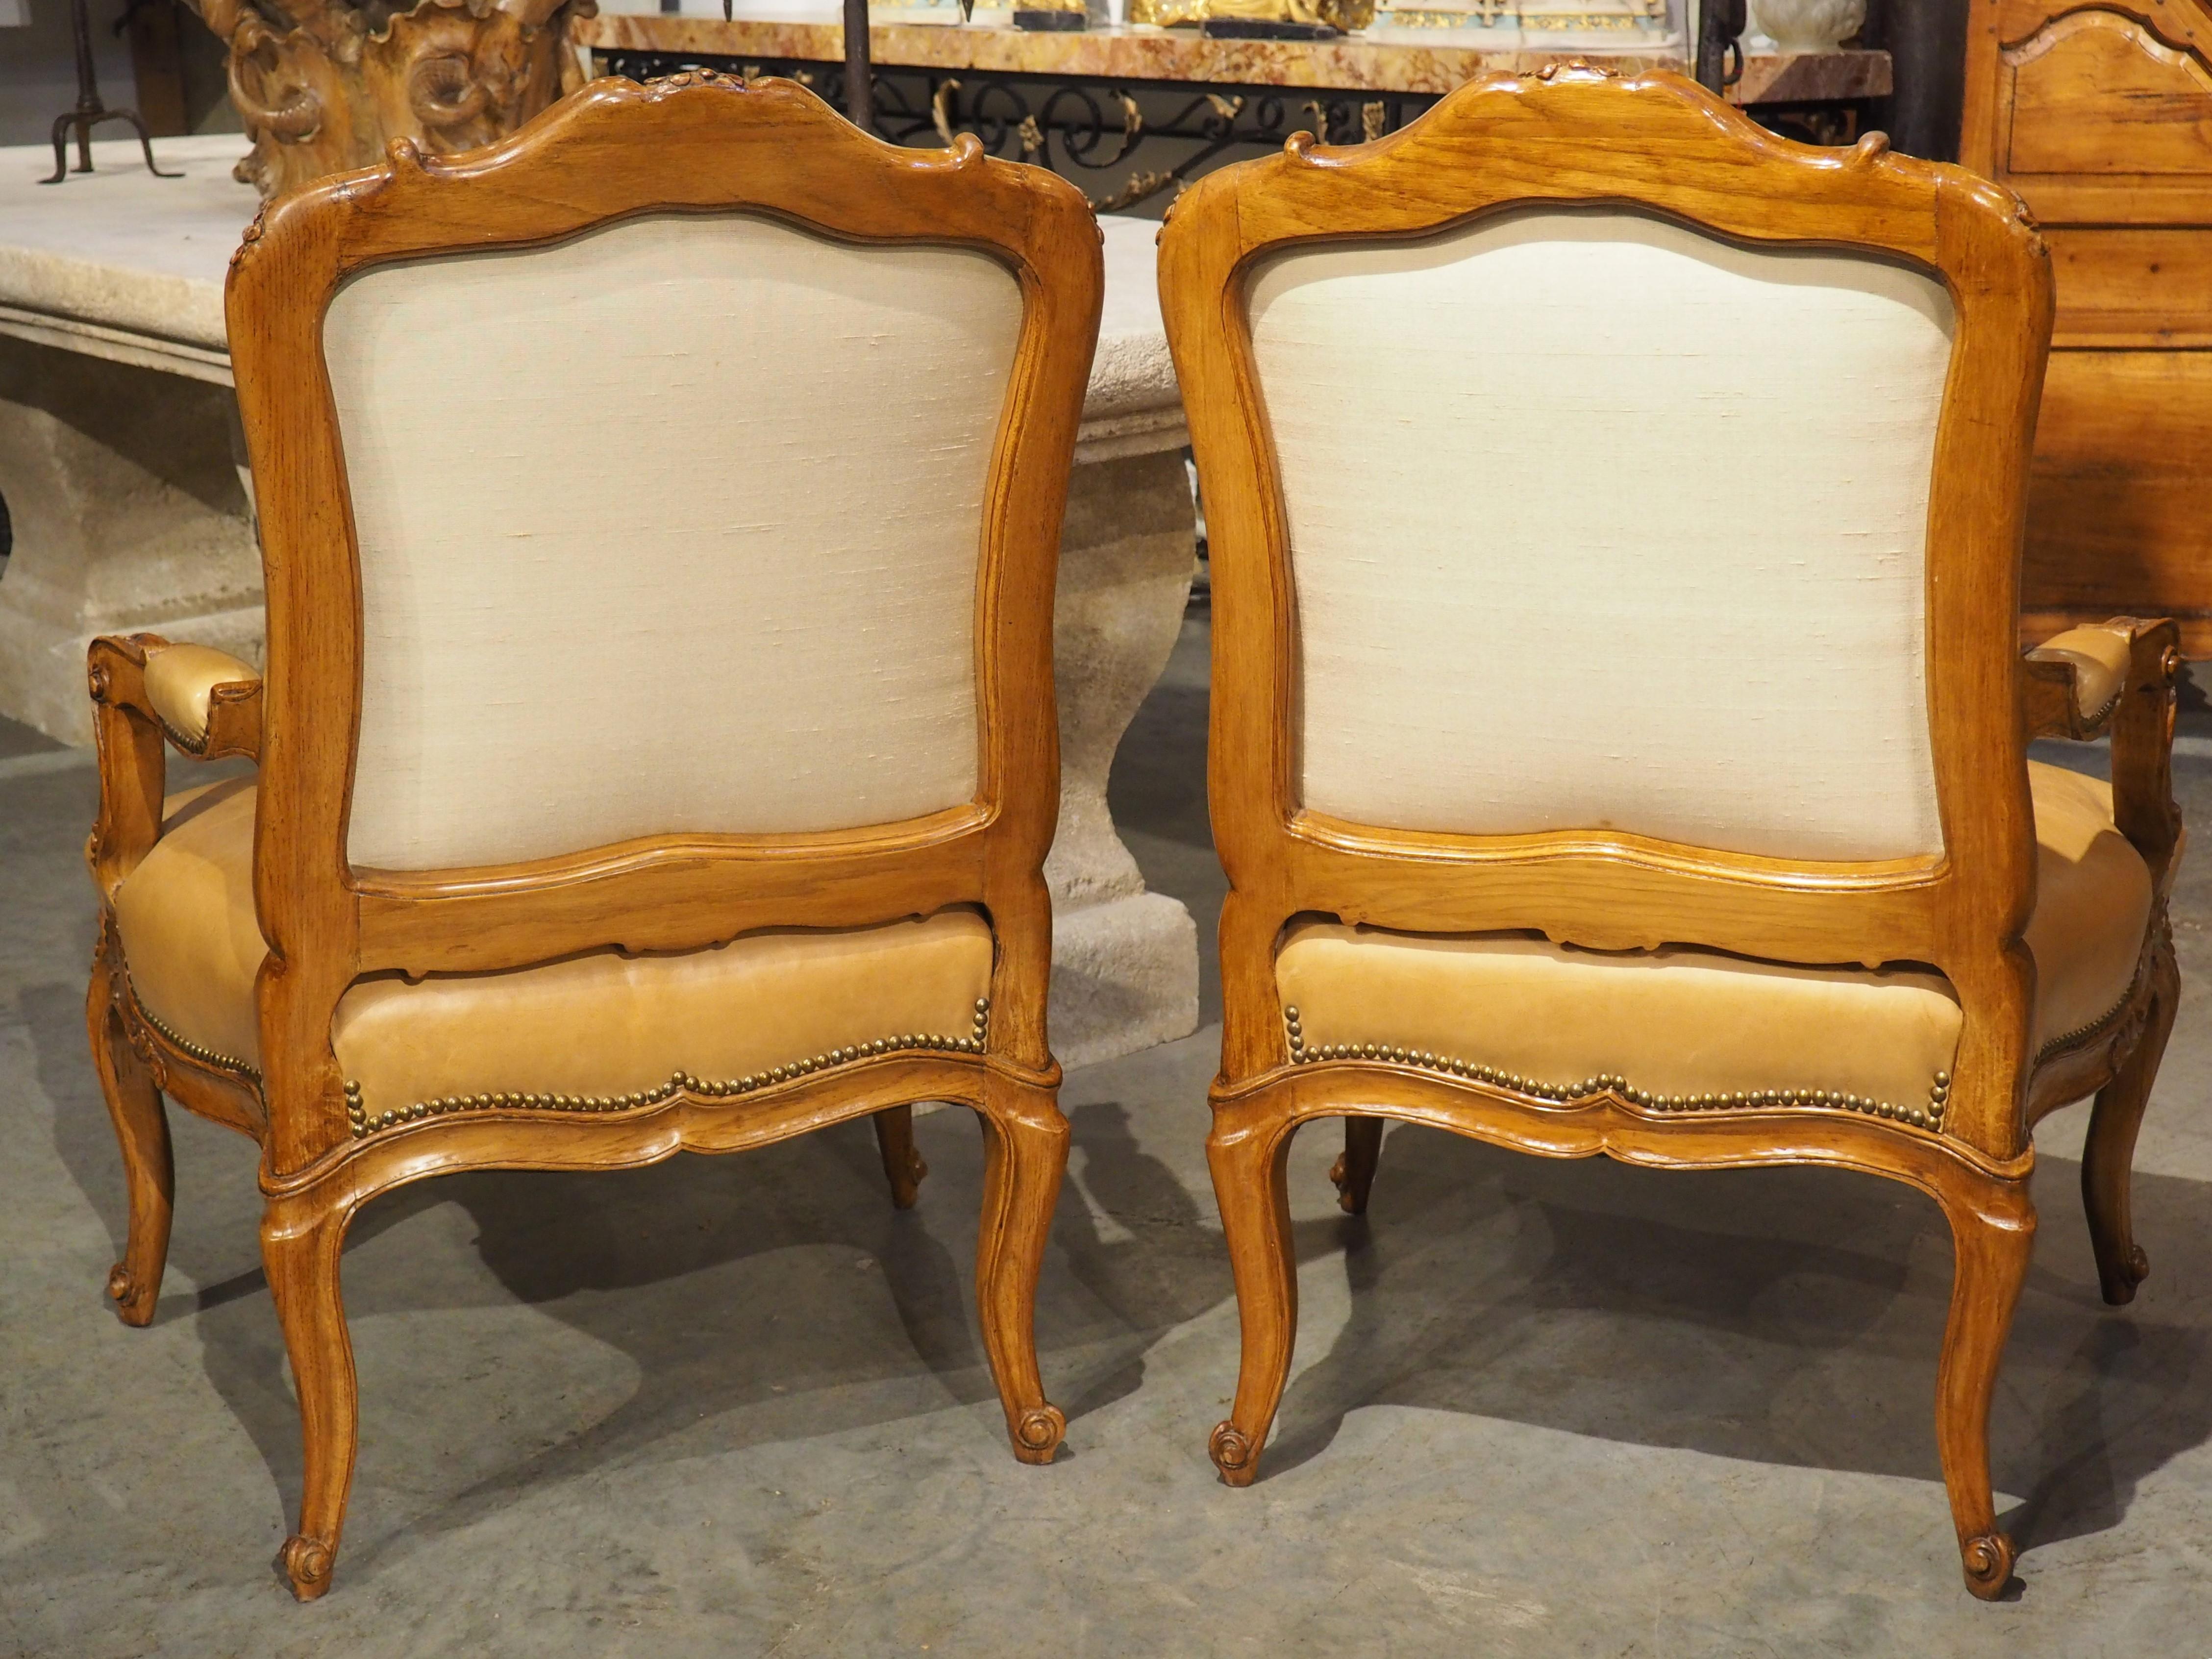 Pair of French Carved Regence Style Armchairs with Leather Upholstery, C. 1900 5